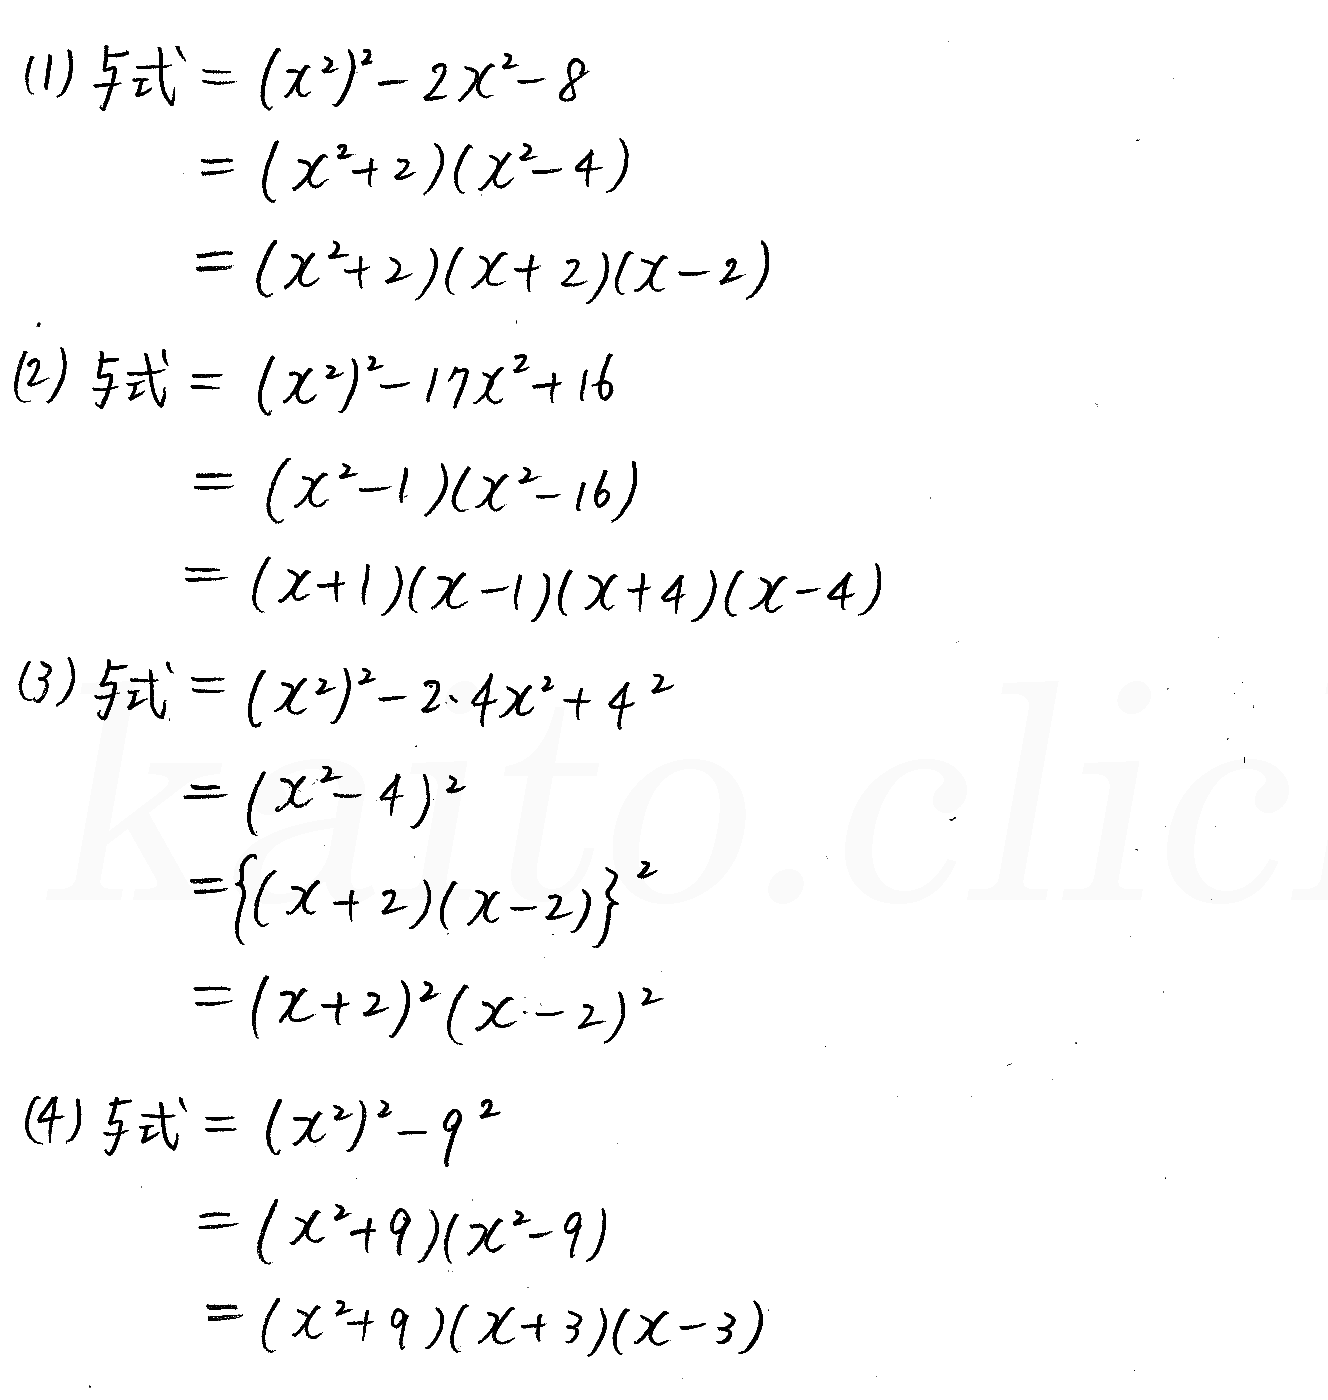 clear数学Ⅰ-40解答 